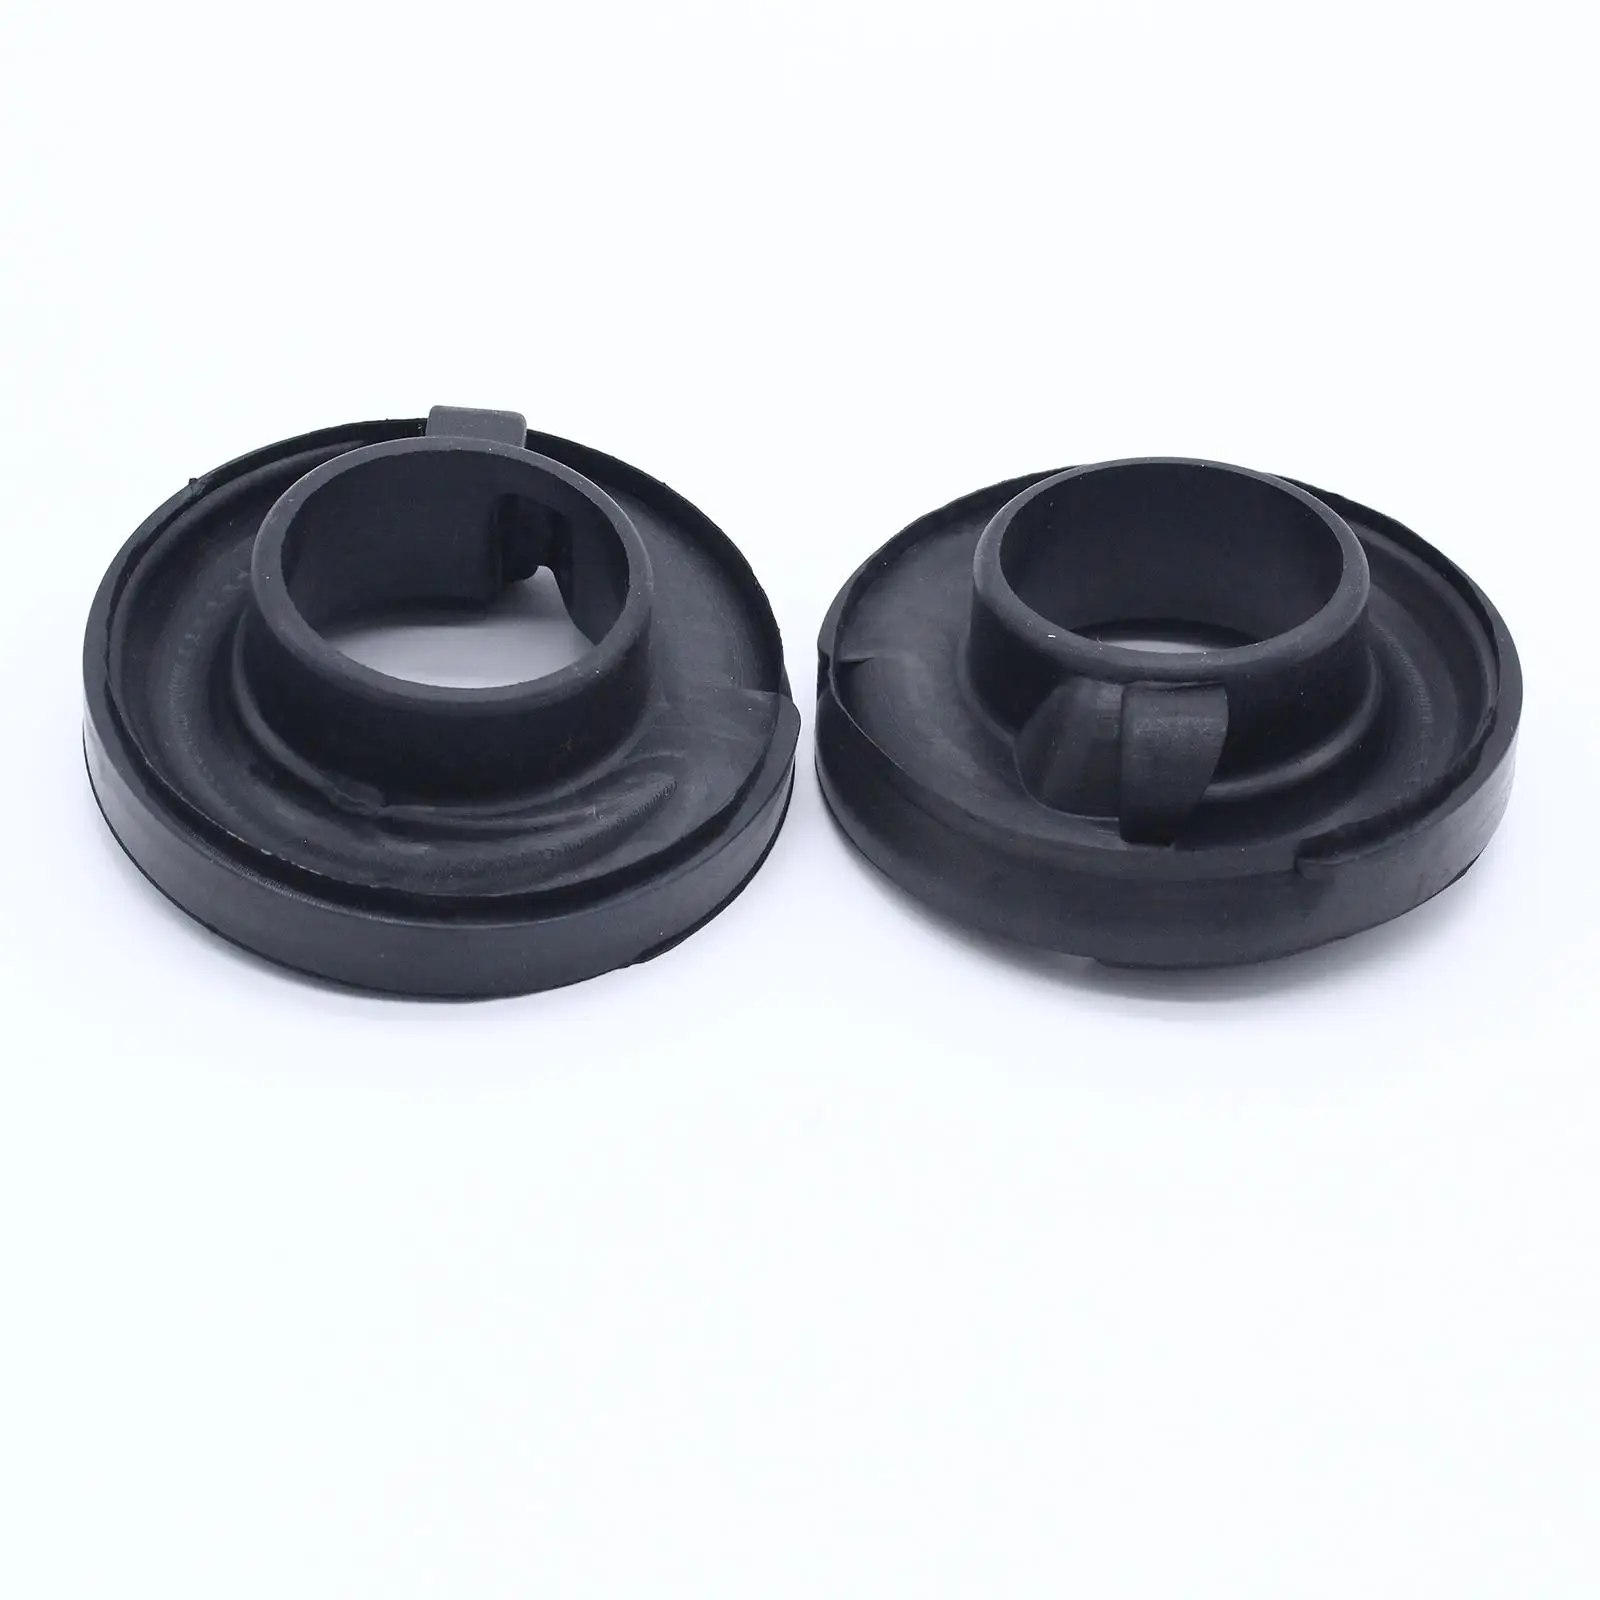 2 Pieces Rear Coil Spring Bottom Mounts Fit for VW T5 Transporter 1.9 2.0 2.5 2003-2015